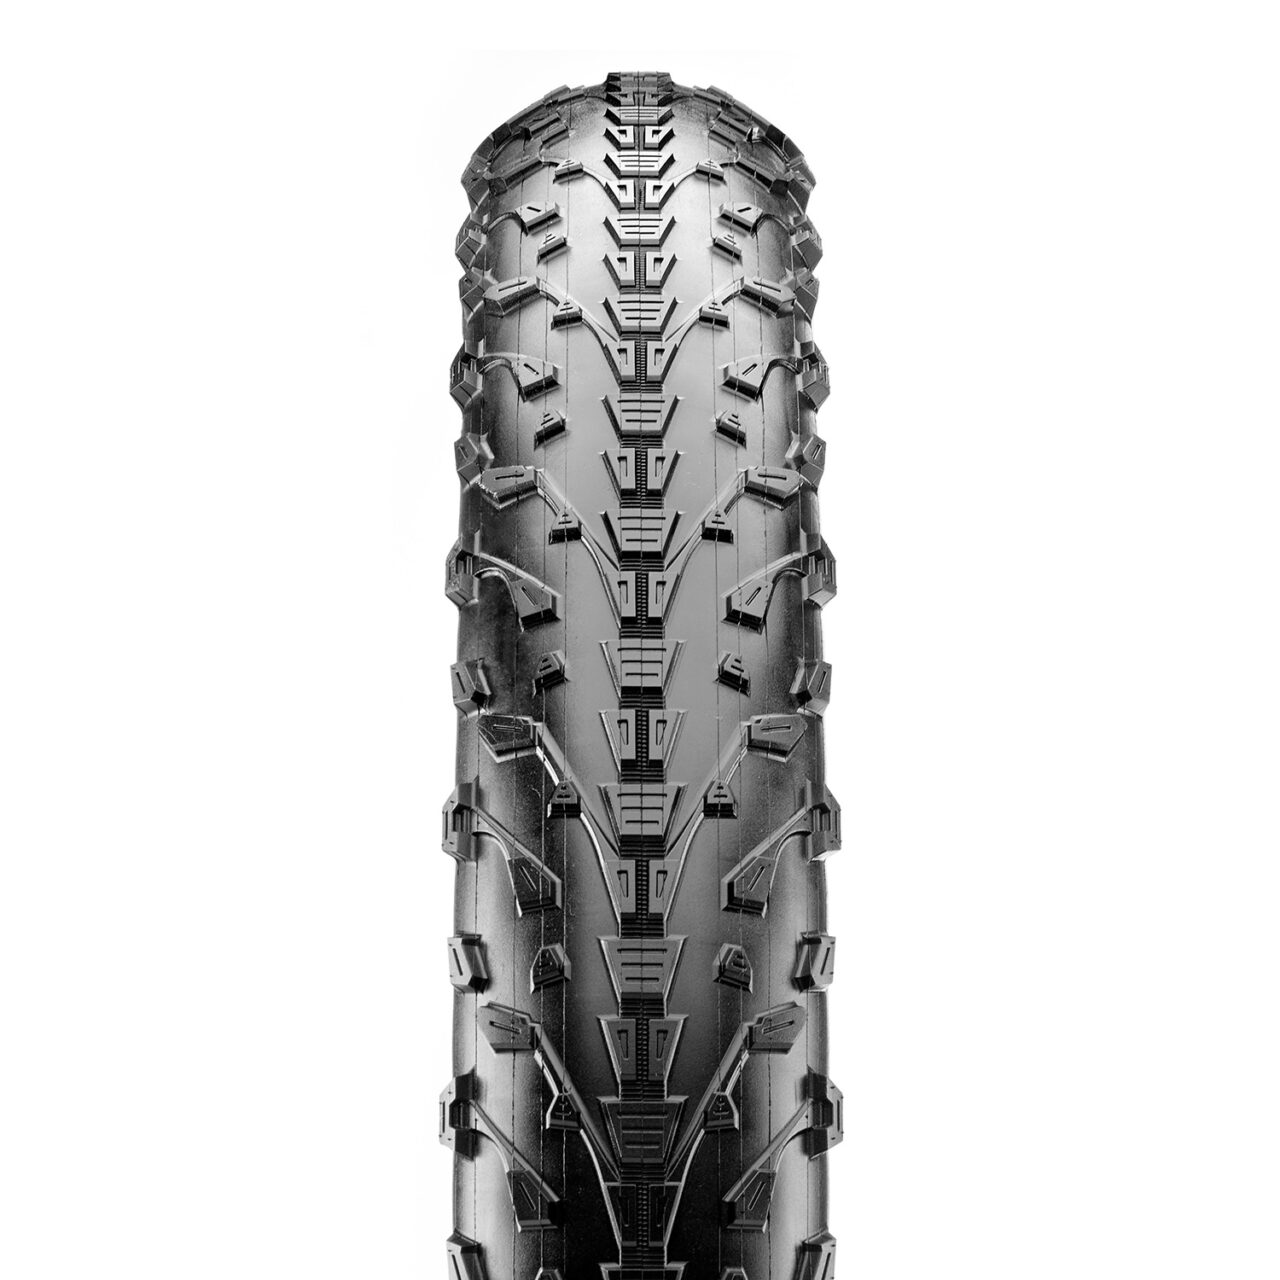 Maxxis Mammoth bicycle tire tread